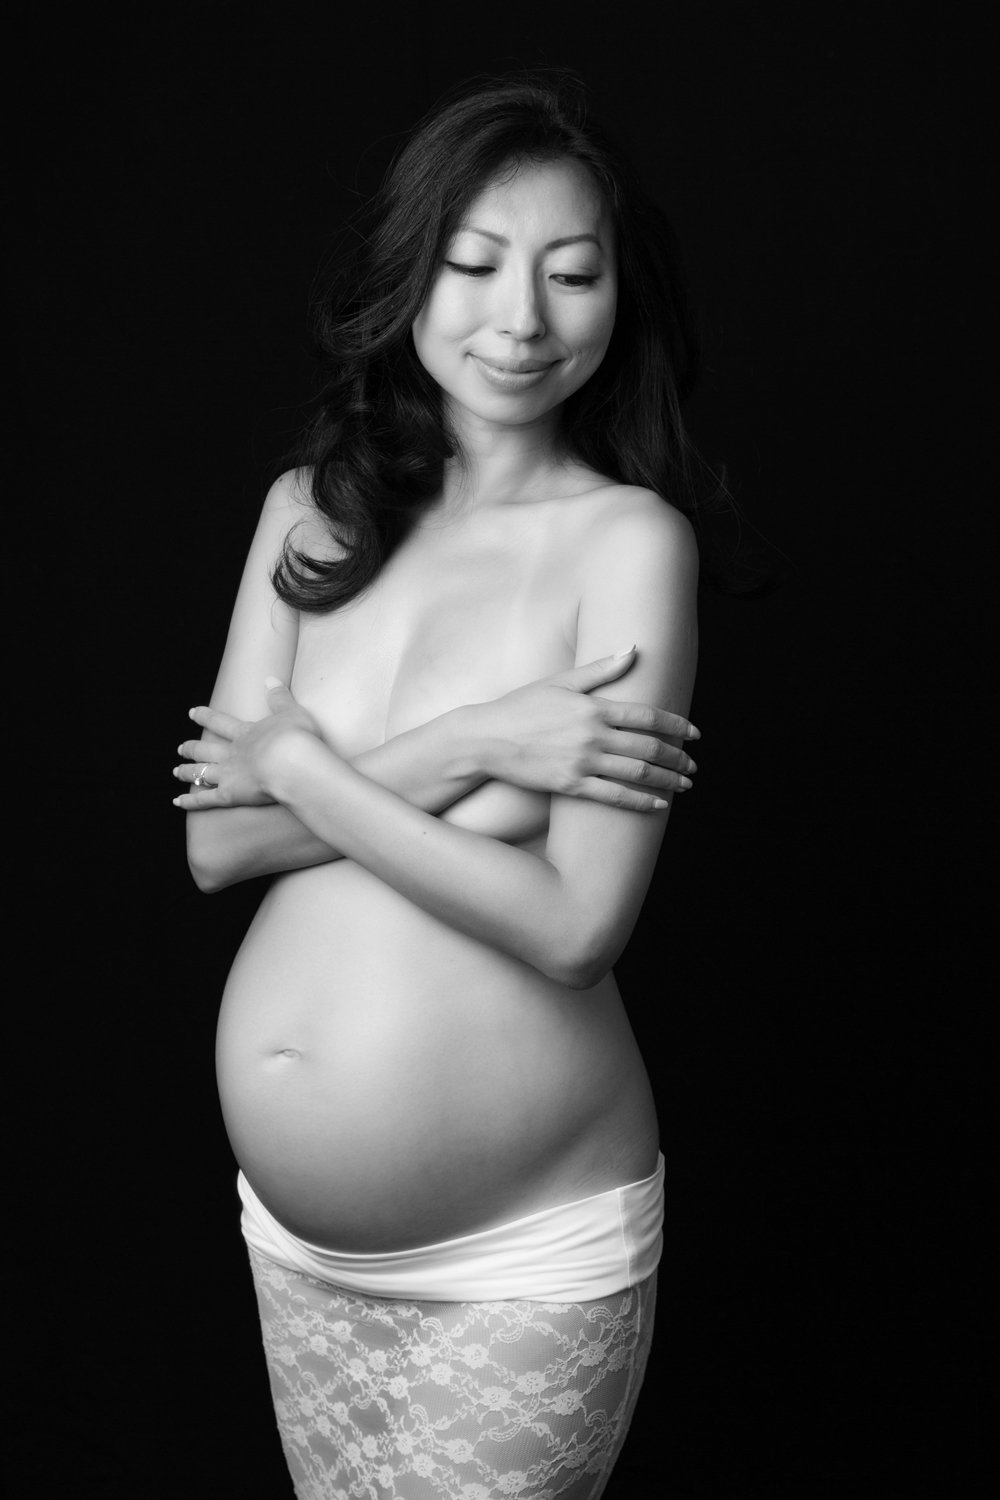 Black and white maternity Photography